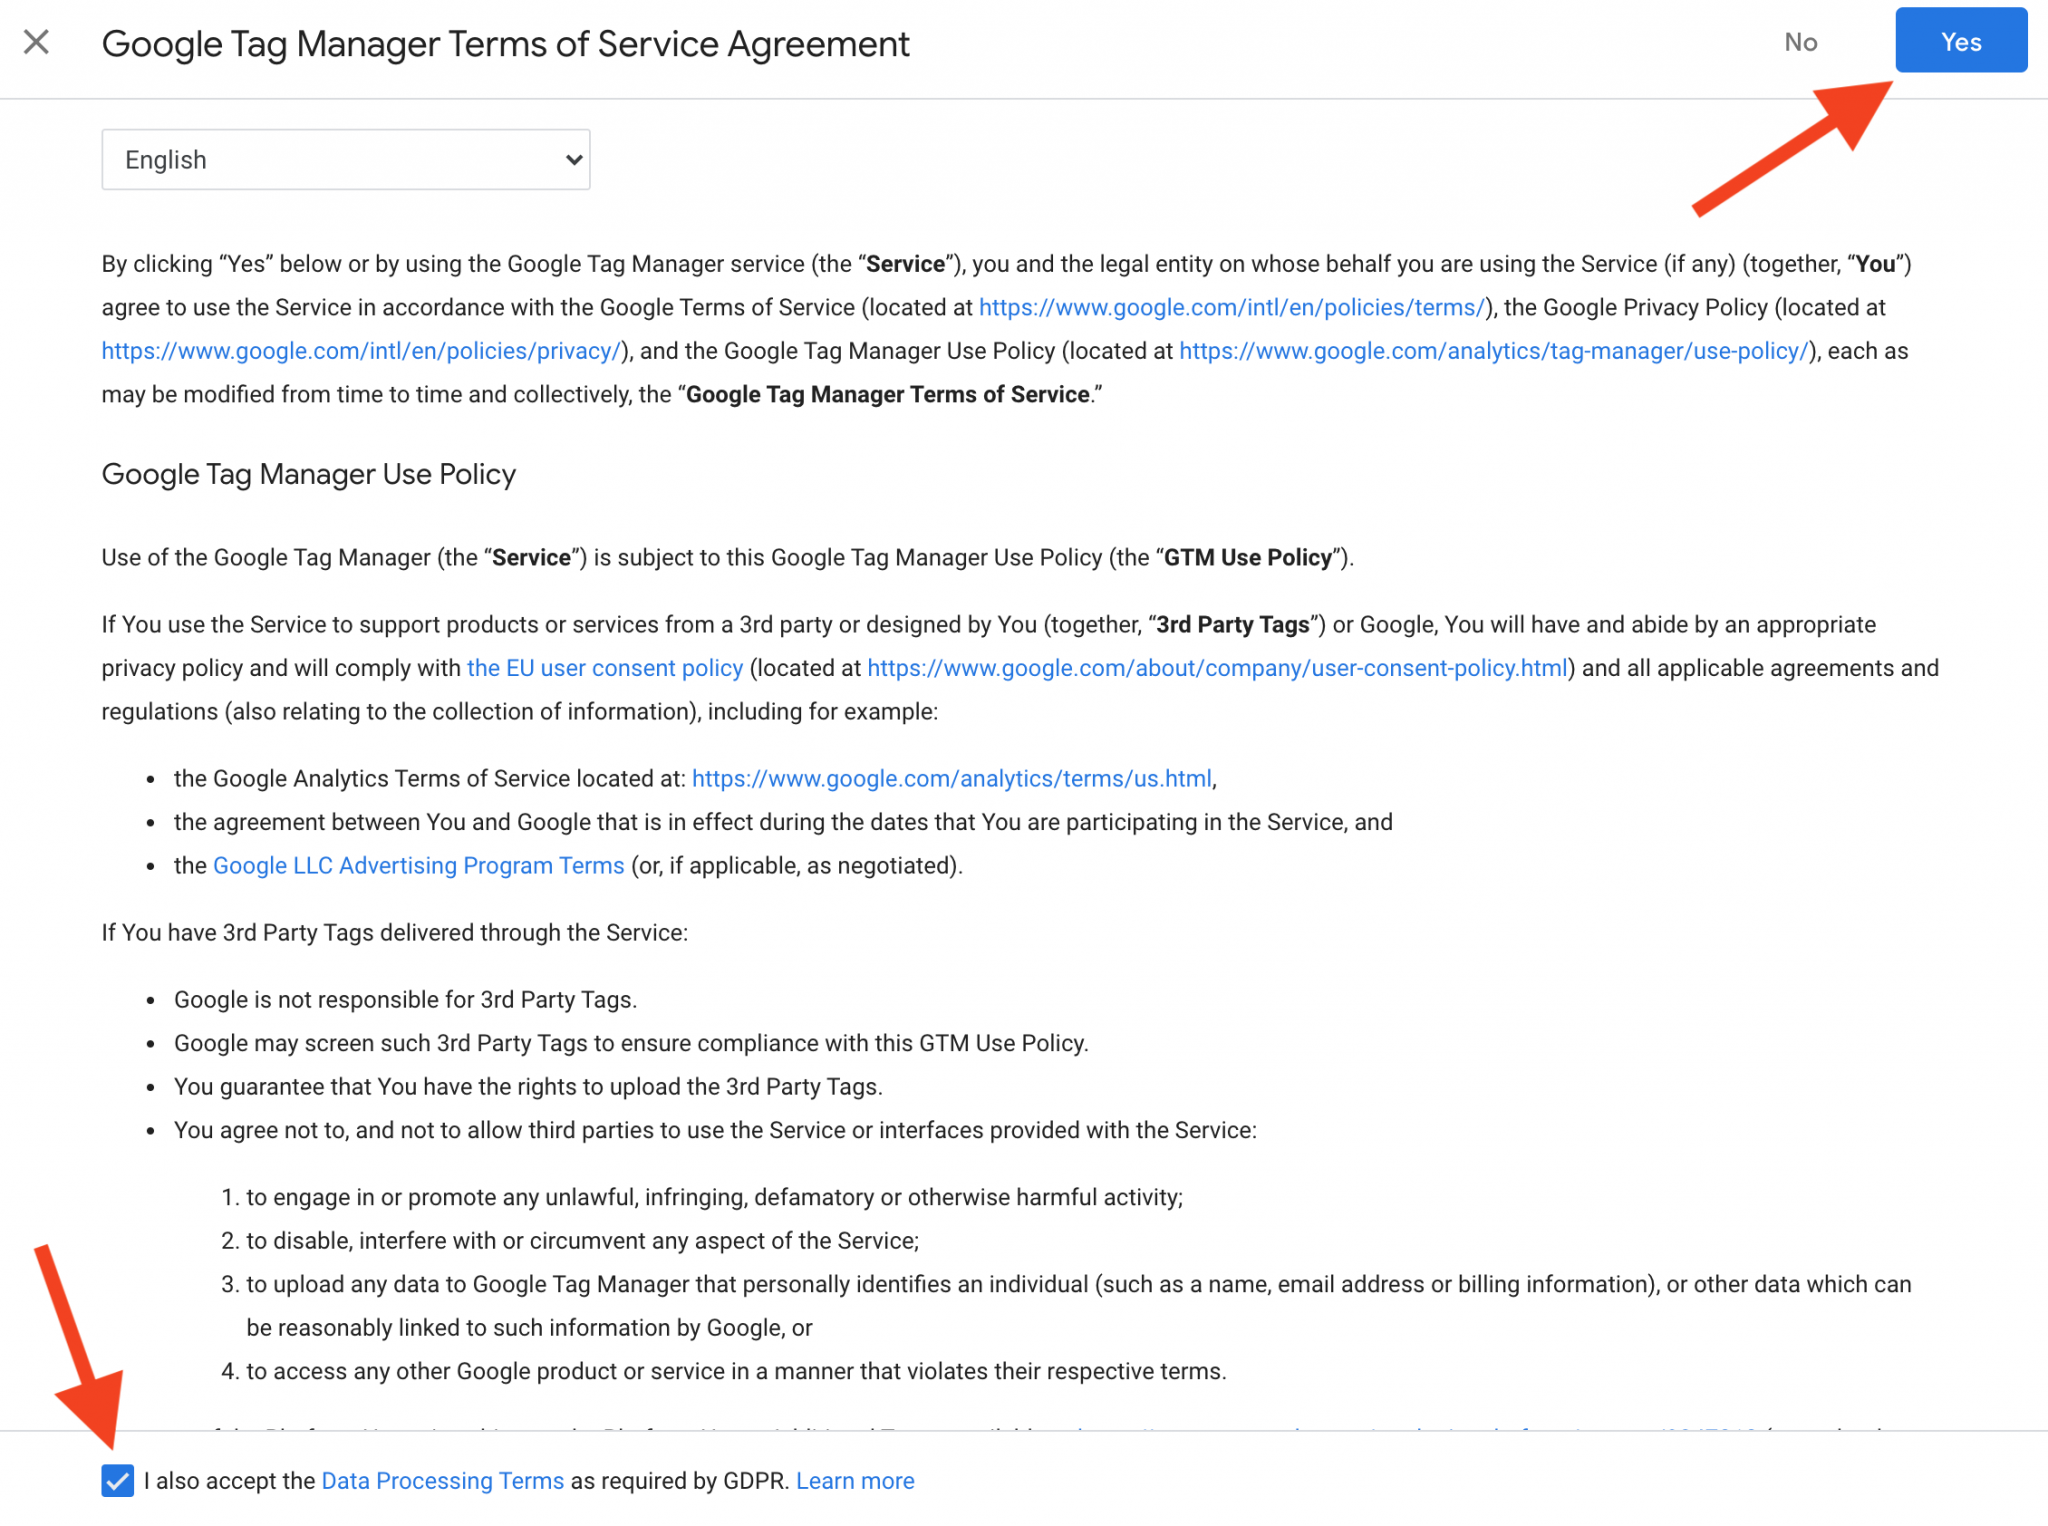 accept the google tag manager terms of service agreement